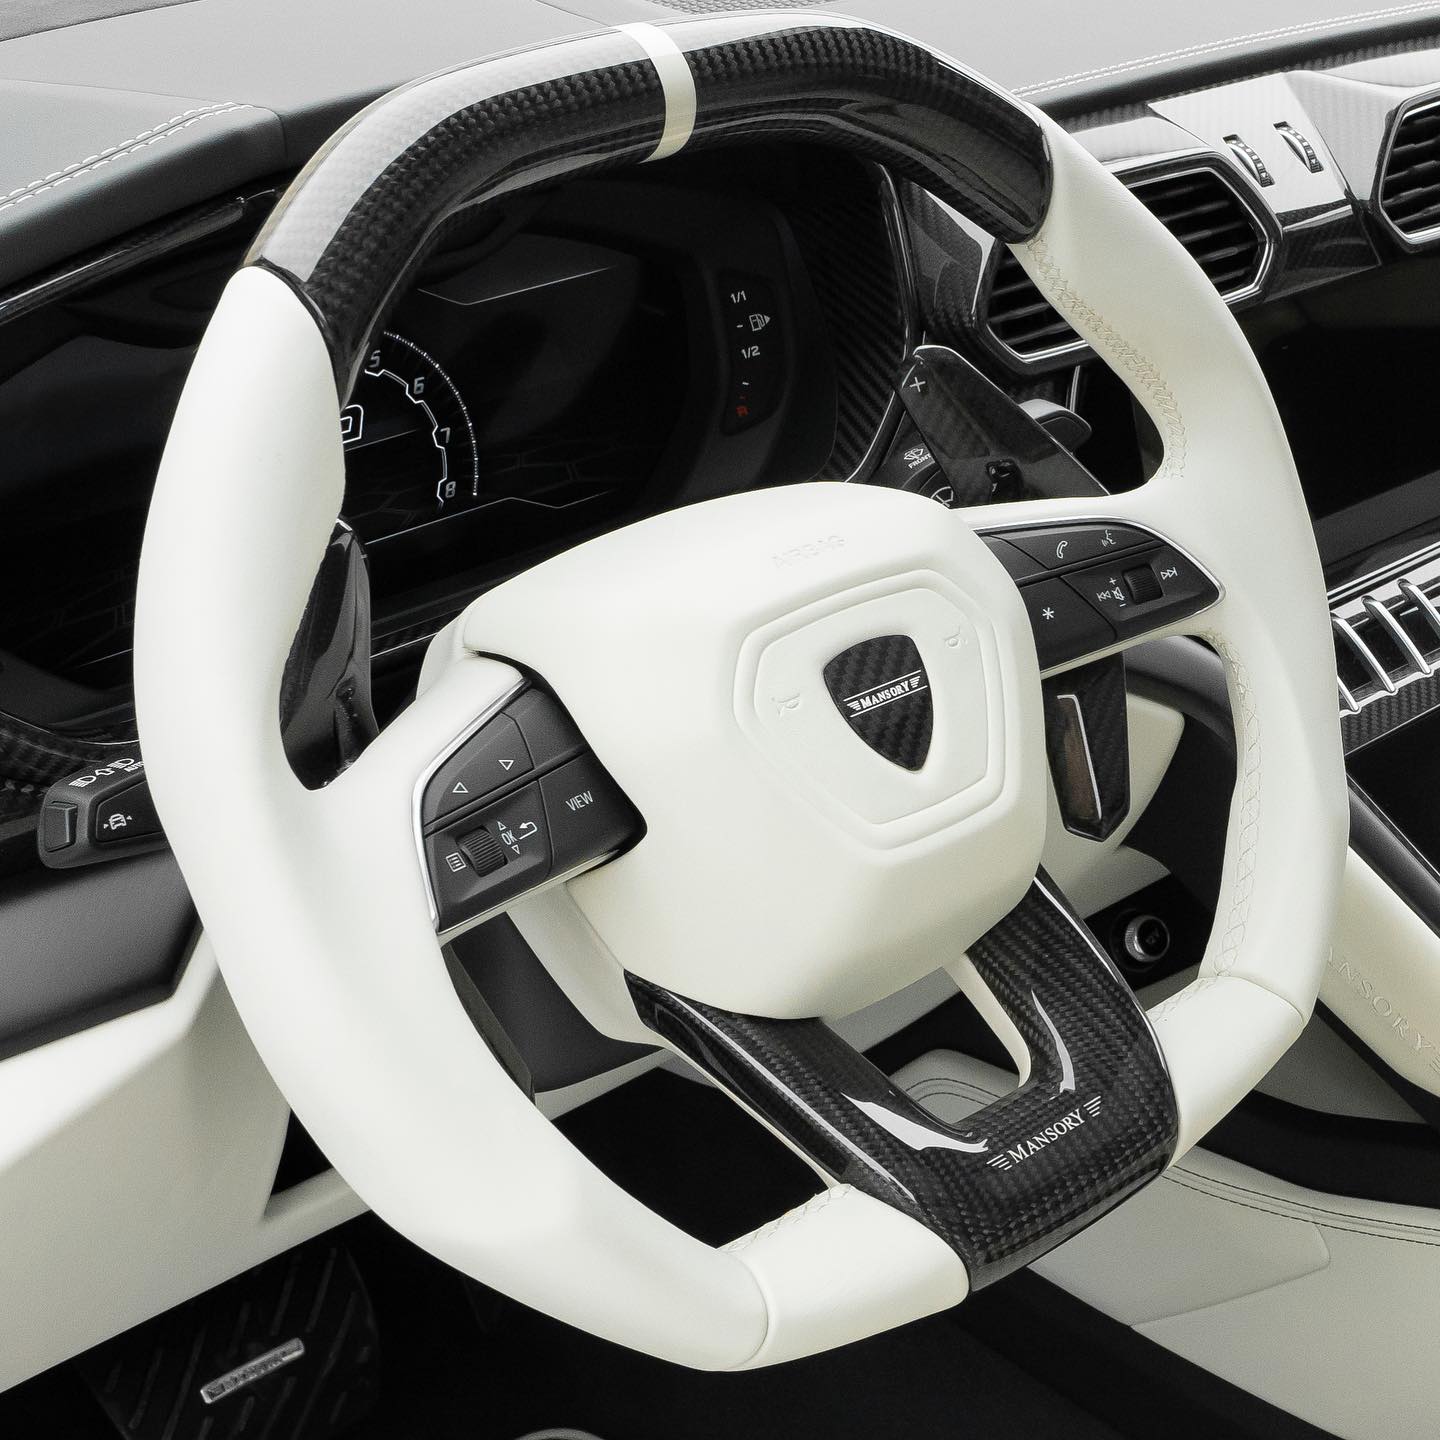 The interior of the mansory venatus finished in white leather